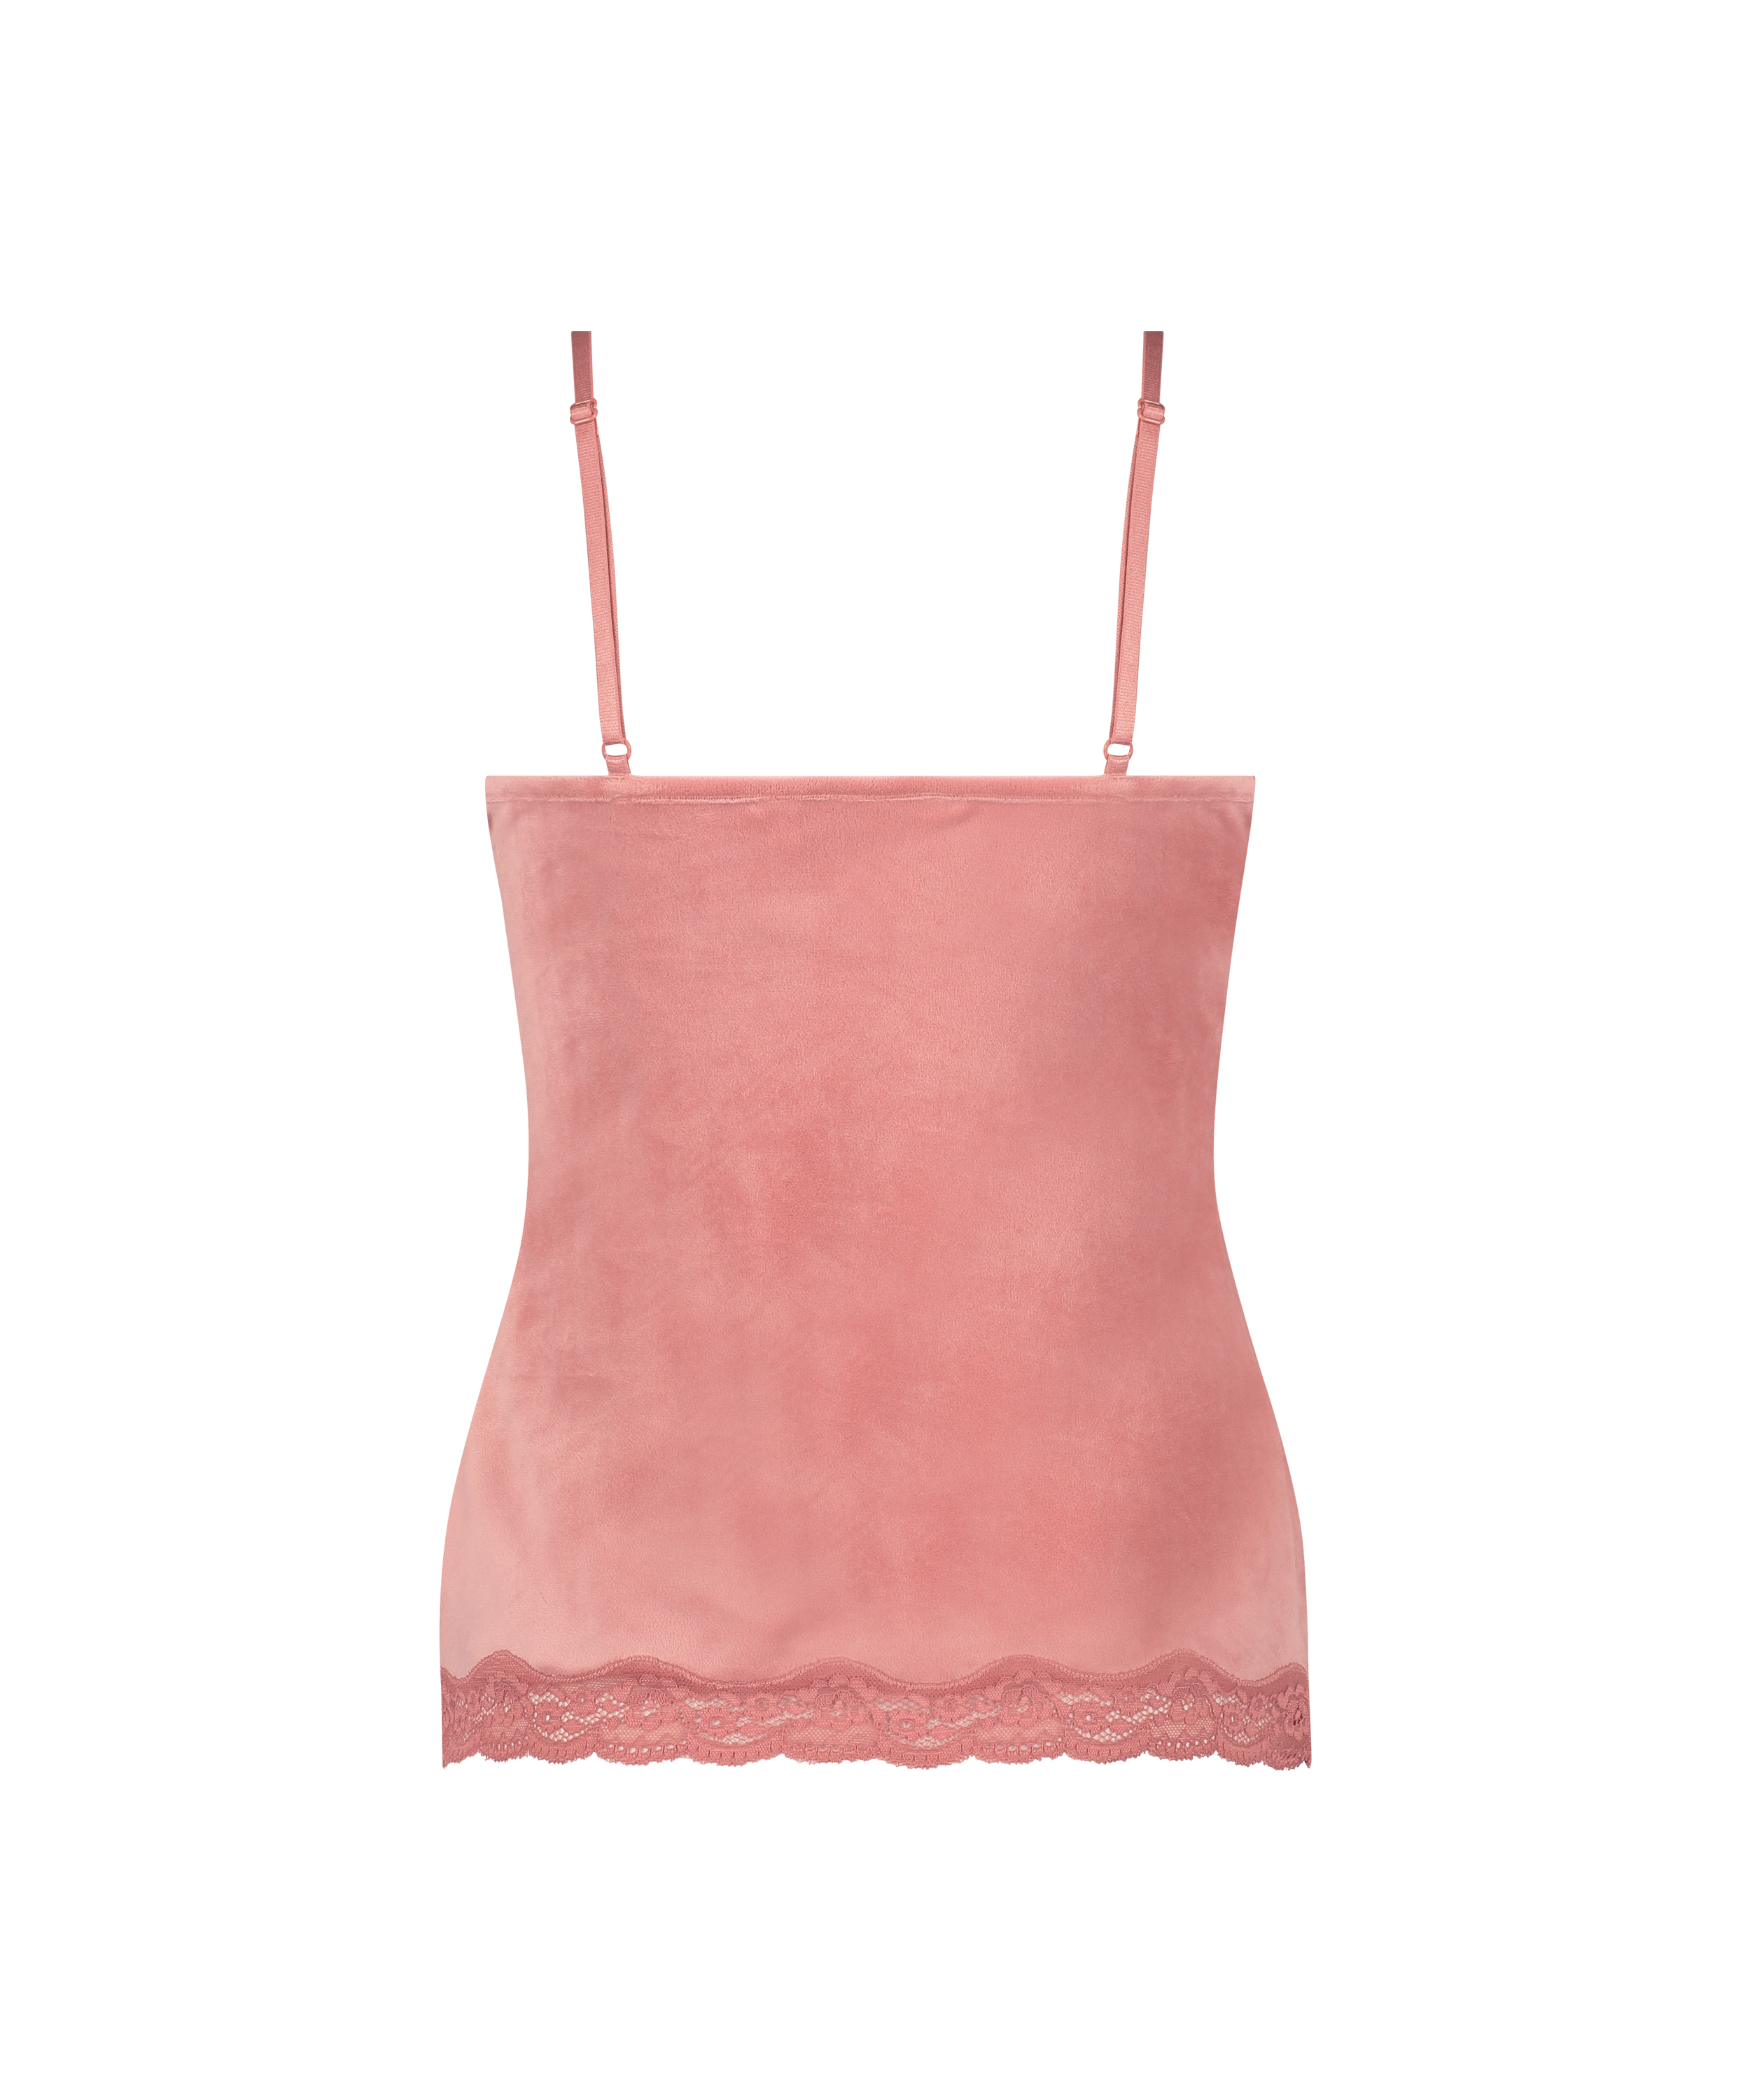 Cami Top Velours Lace, Rose, main